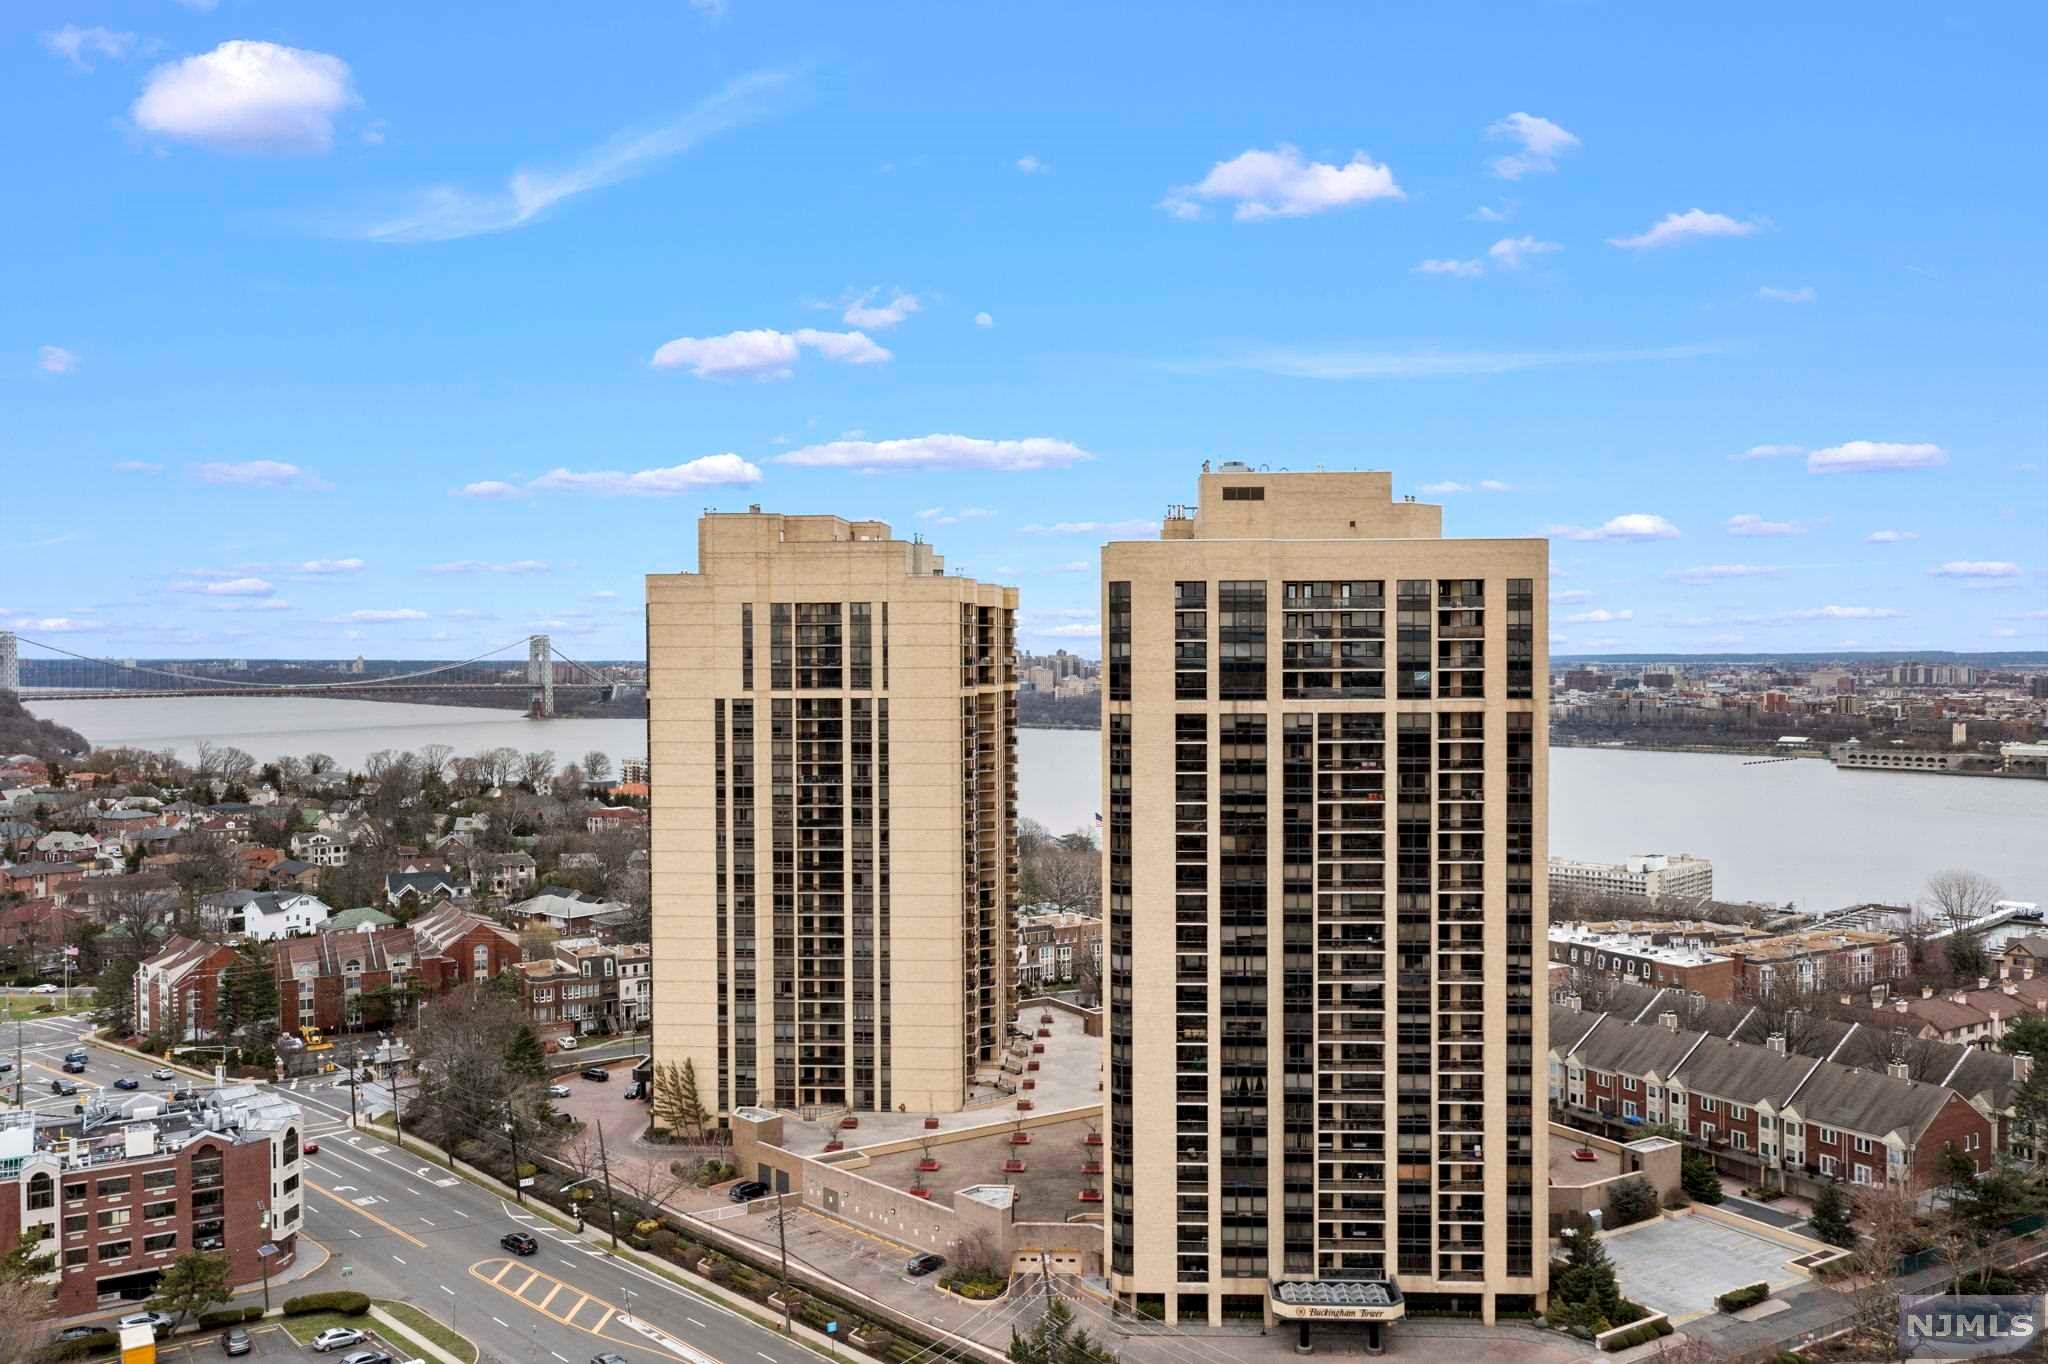 MLS Number 22033651 - 2 bed,2 bath, Rentals-Residential Property for $4,500  - 800 Palisade Avenue, Unit 203, Fort Lee, NJ - New Jersey Multiple Listing  Service